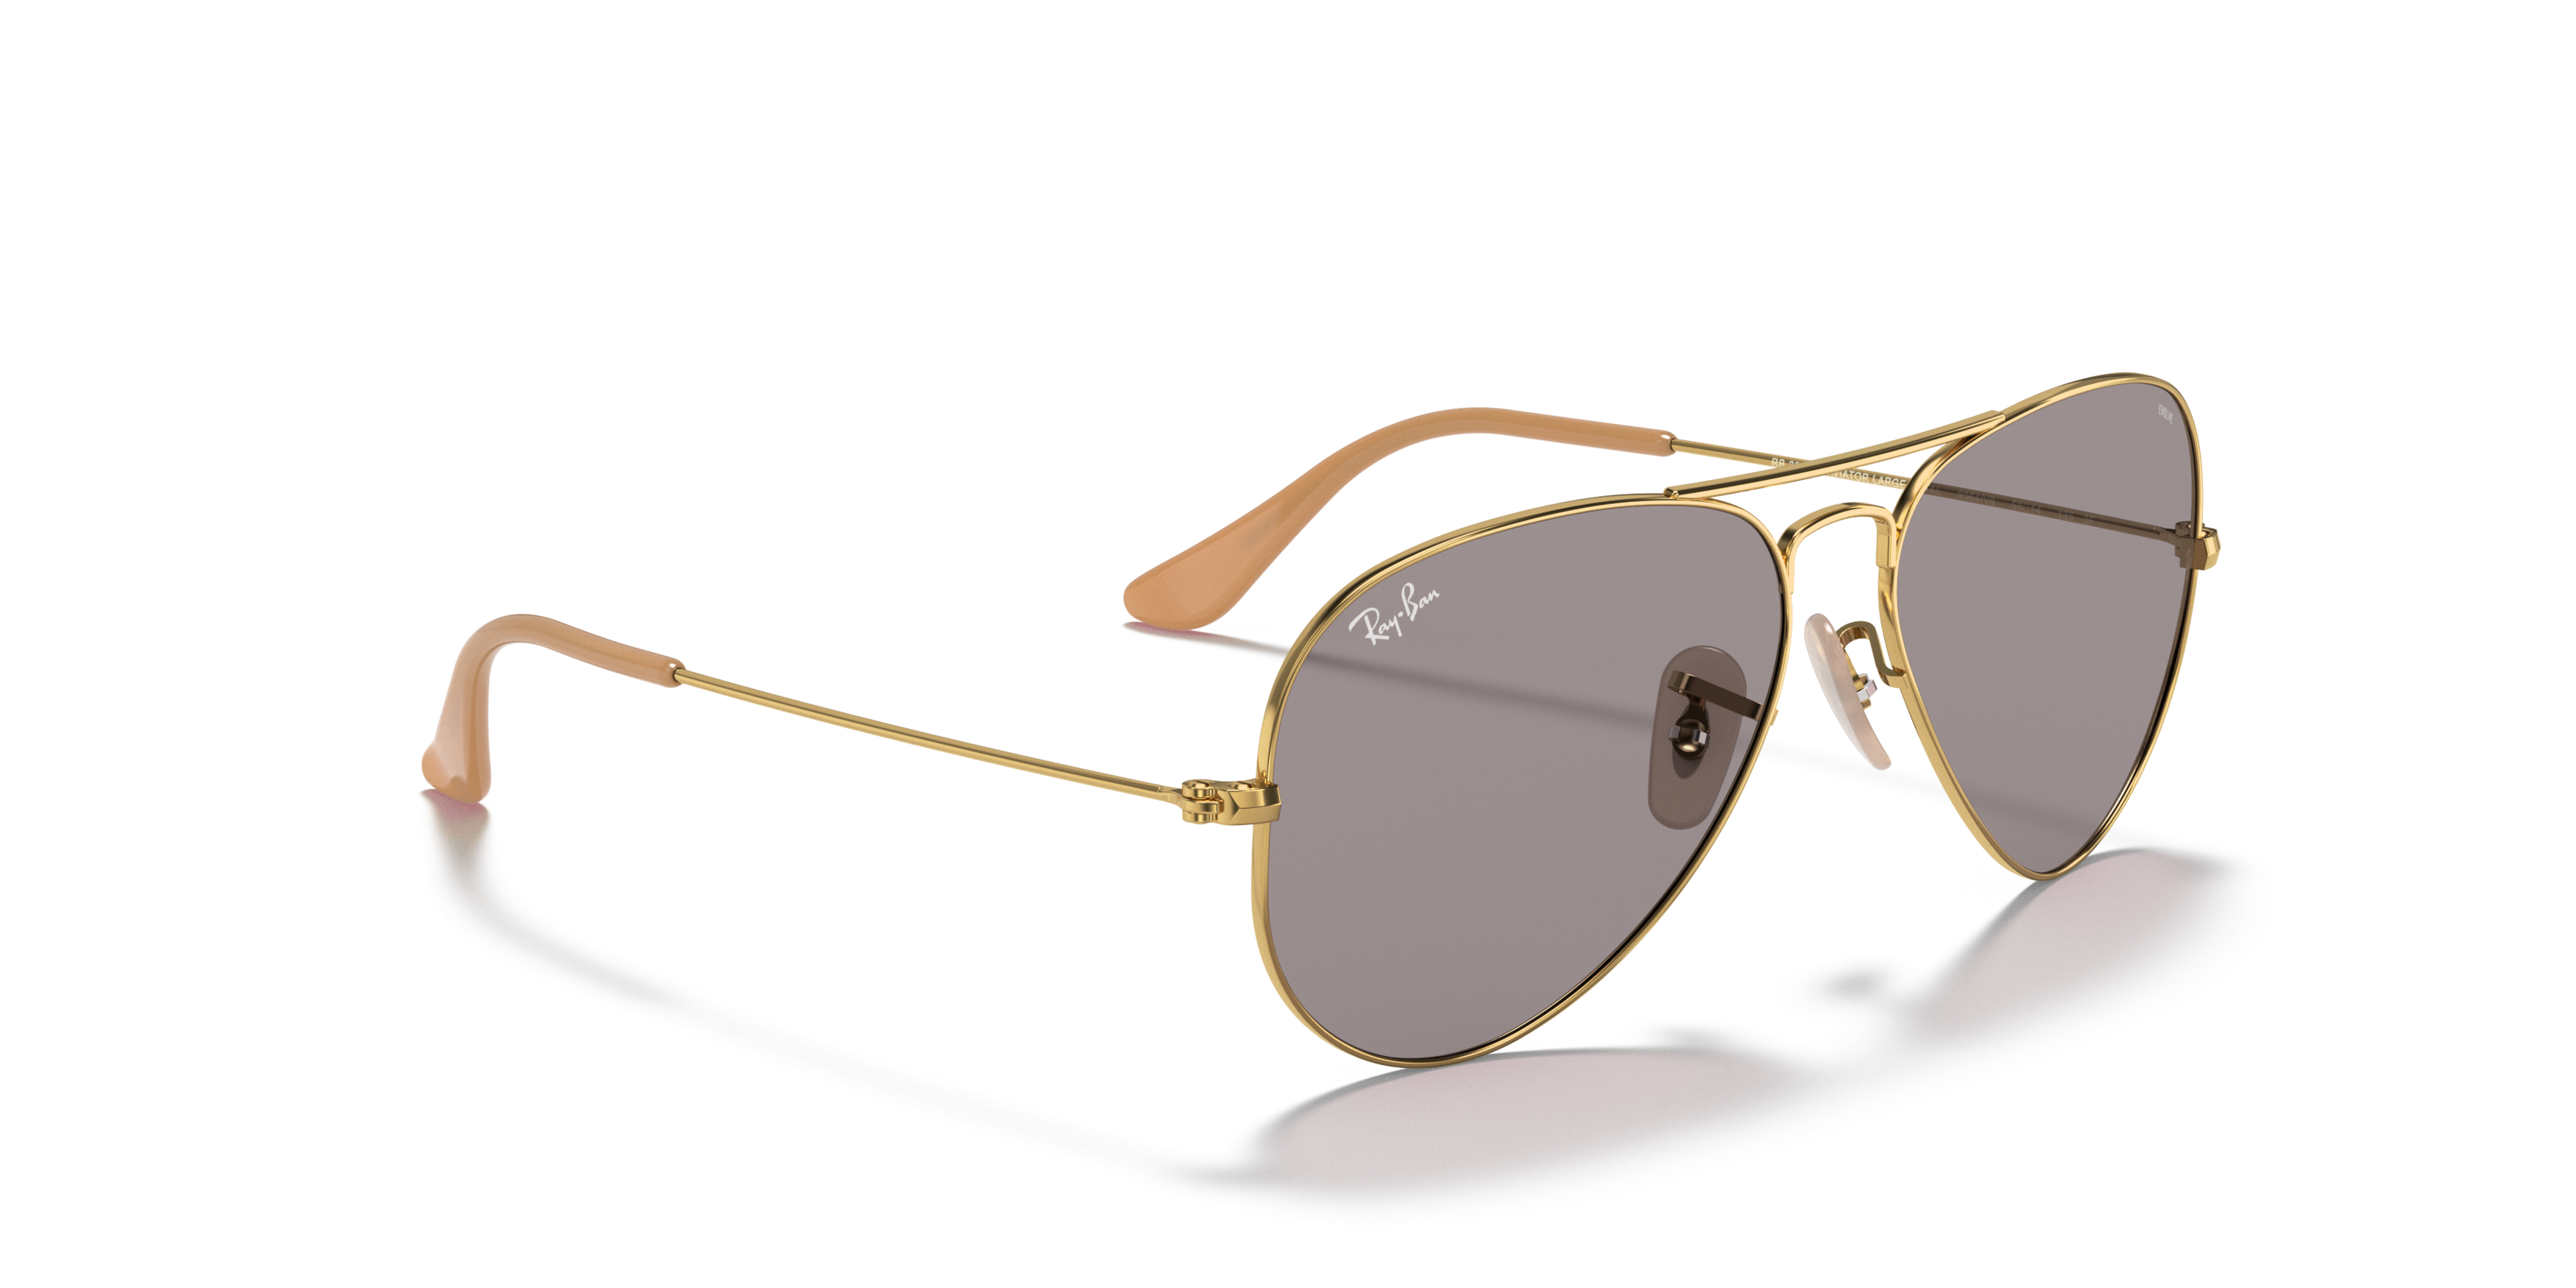 Angle_Right01 Ray-Ban RB3025 9064V8 Grijs / Goud